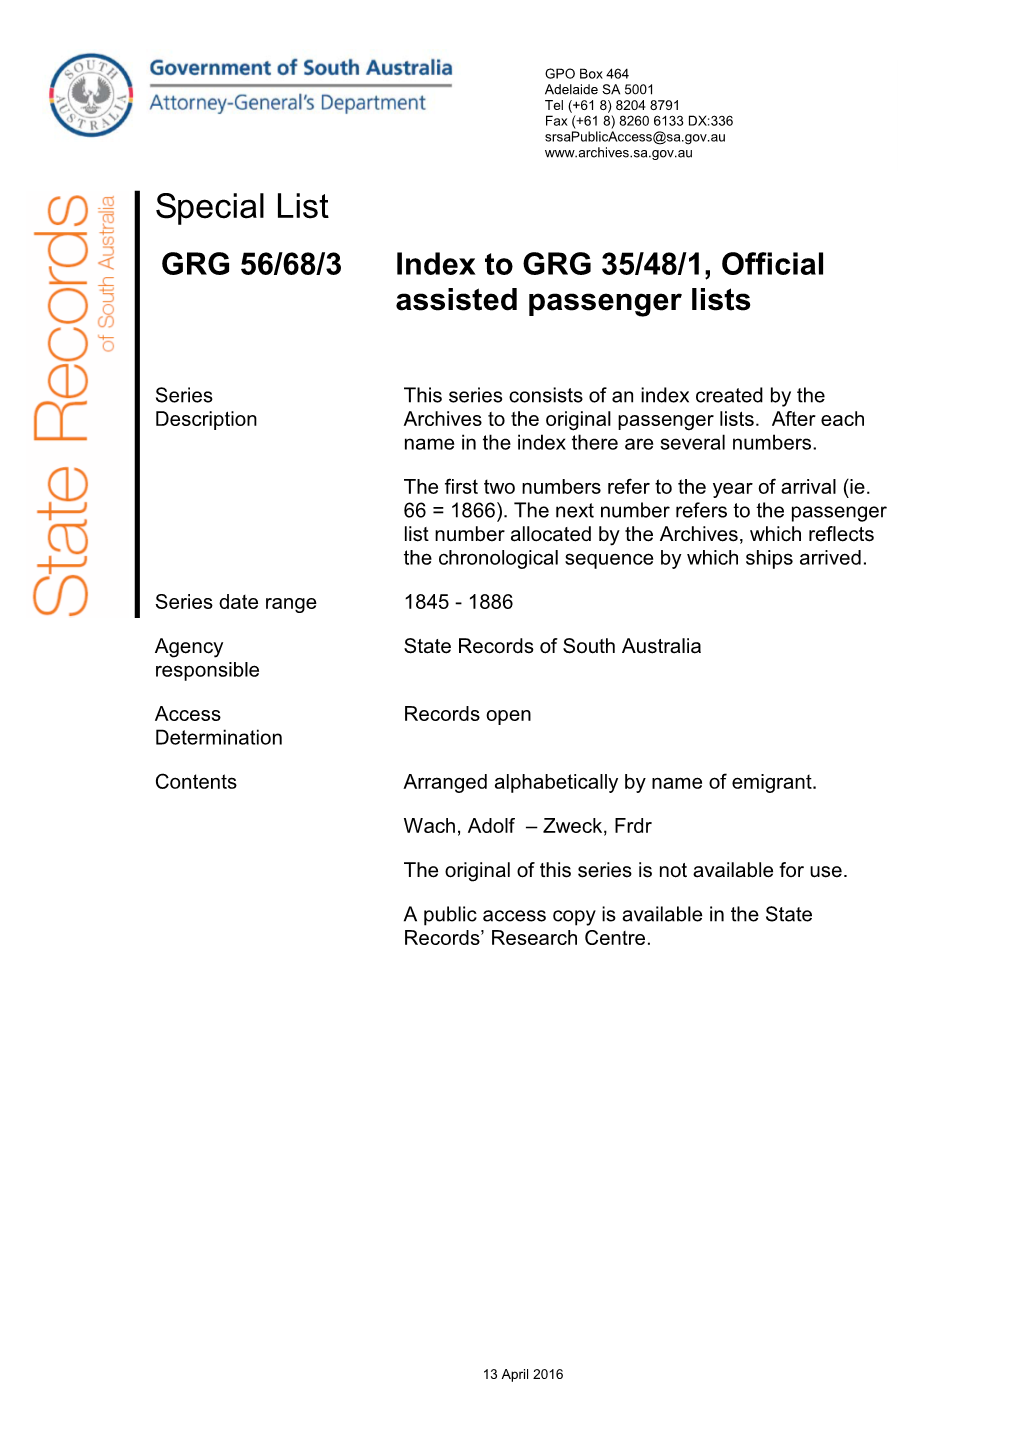 GRG 56/68/3 Index to Official Assisted Passenger Lists 1845